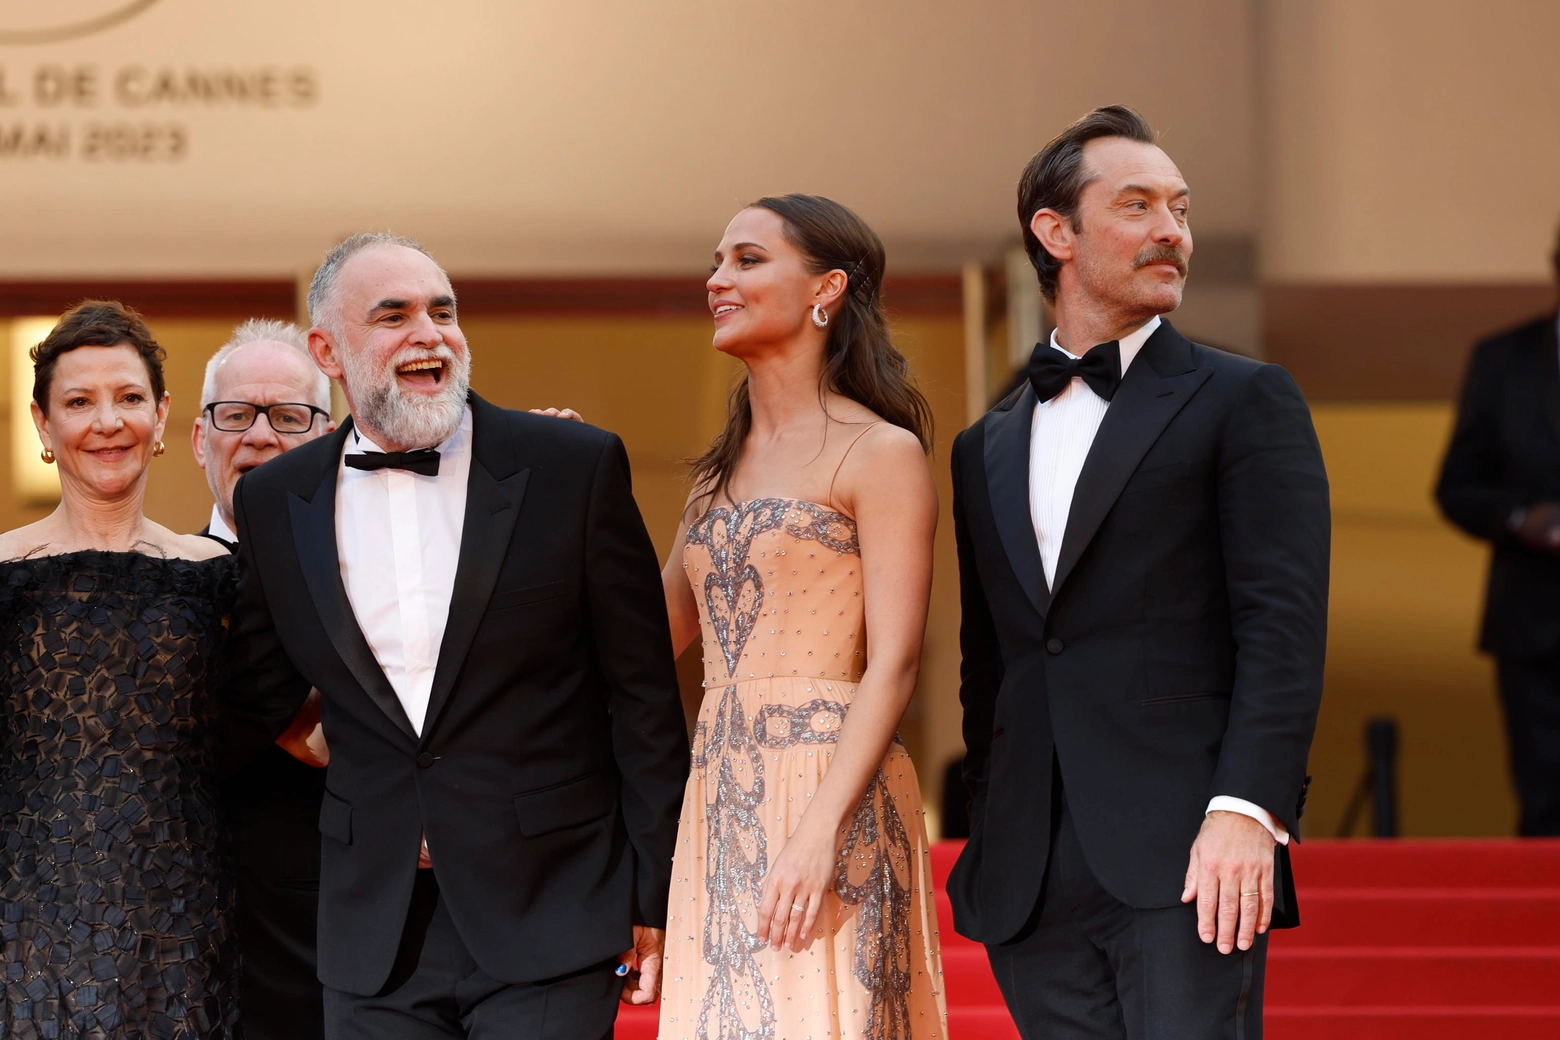 epa10644365 (L-R) Gabrielle Tana, director Karim Ainouz, Alicia Vikander, and Jude Law arrive for the screening of 'Le Jeu de la reine' (Firebrand) during the 76th annual Cannes Film Festival, in Cannes, France, 21 May 2023. The movie is presented in the Official Competition of the festival which runs from 16 to 27 May.  EPA/SEBASTIEN NOGIER